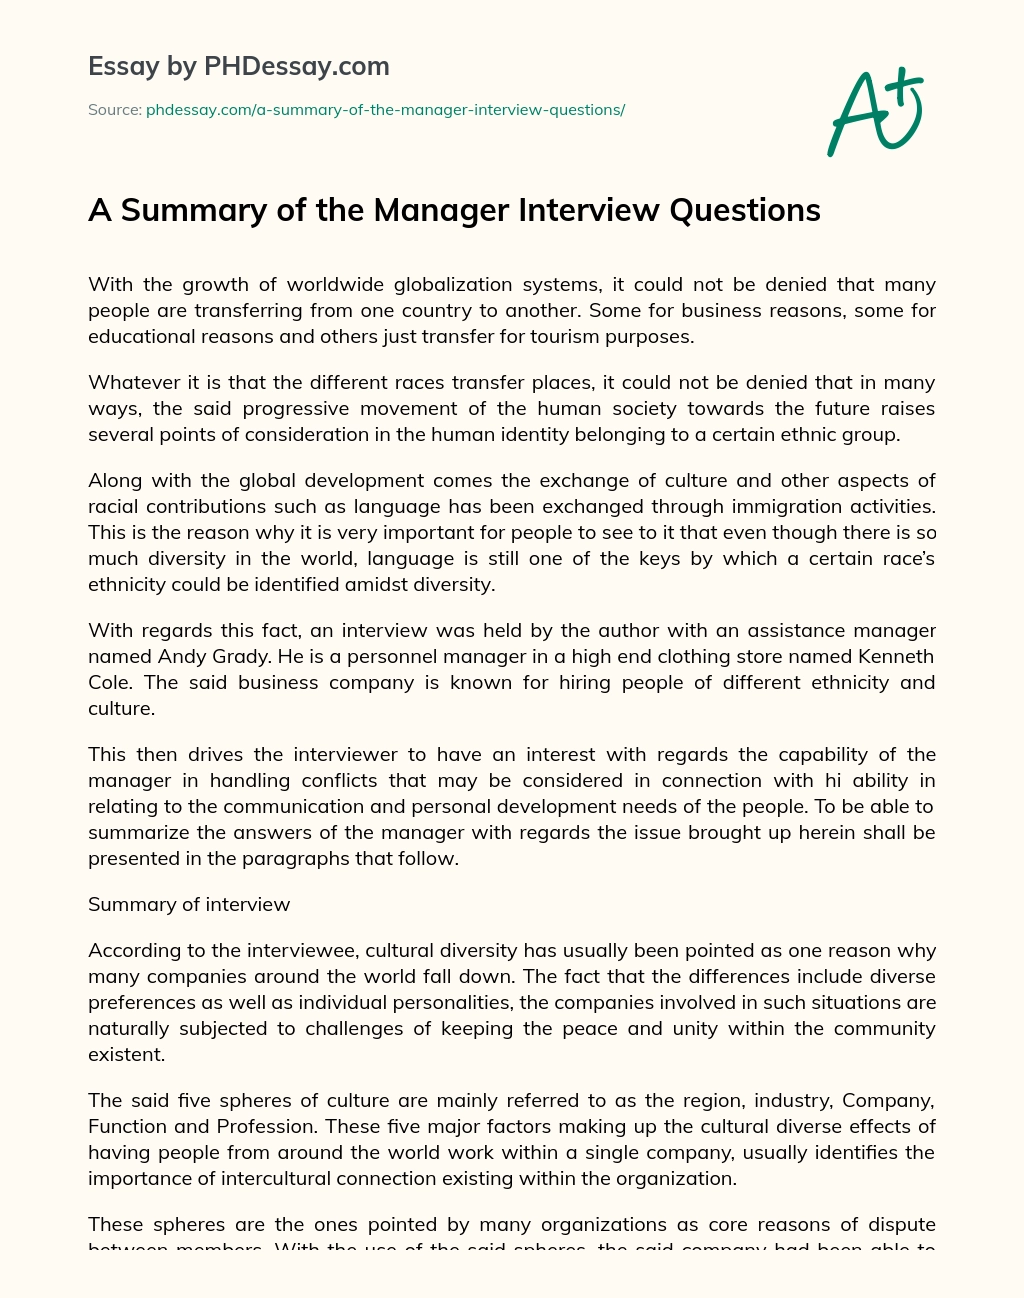 A Summary of the Manager Interview Questions essay